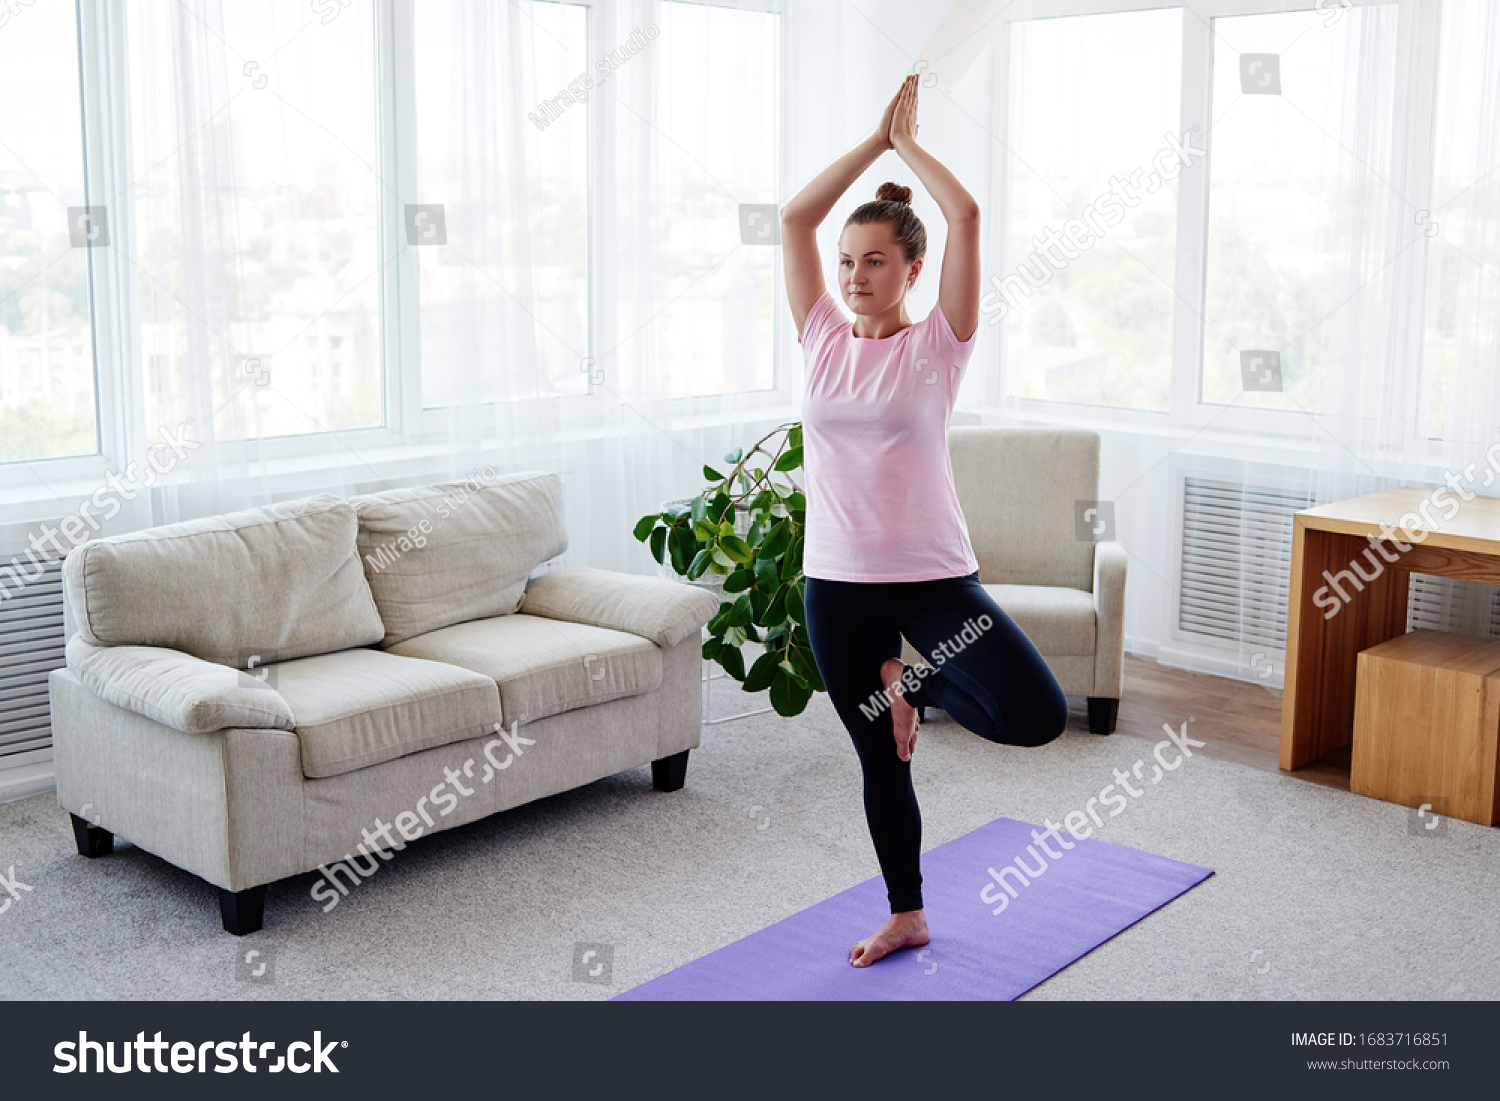 Portrait of young woman practicing balance yoga asana Vrikshasana at home indoor, copy space, back view. Girl doing tree pose, full length. Relaxing and doing yoga. Wellness and healthy lifestyle #1683716851